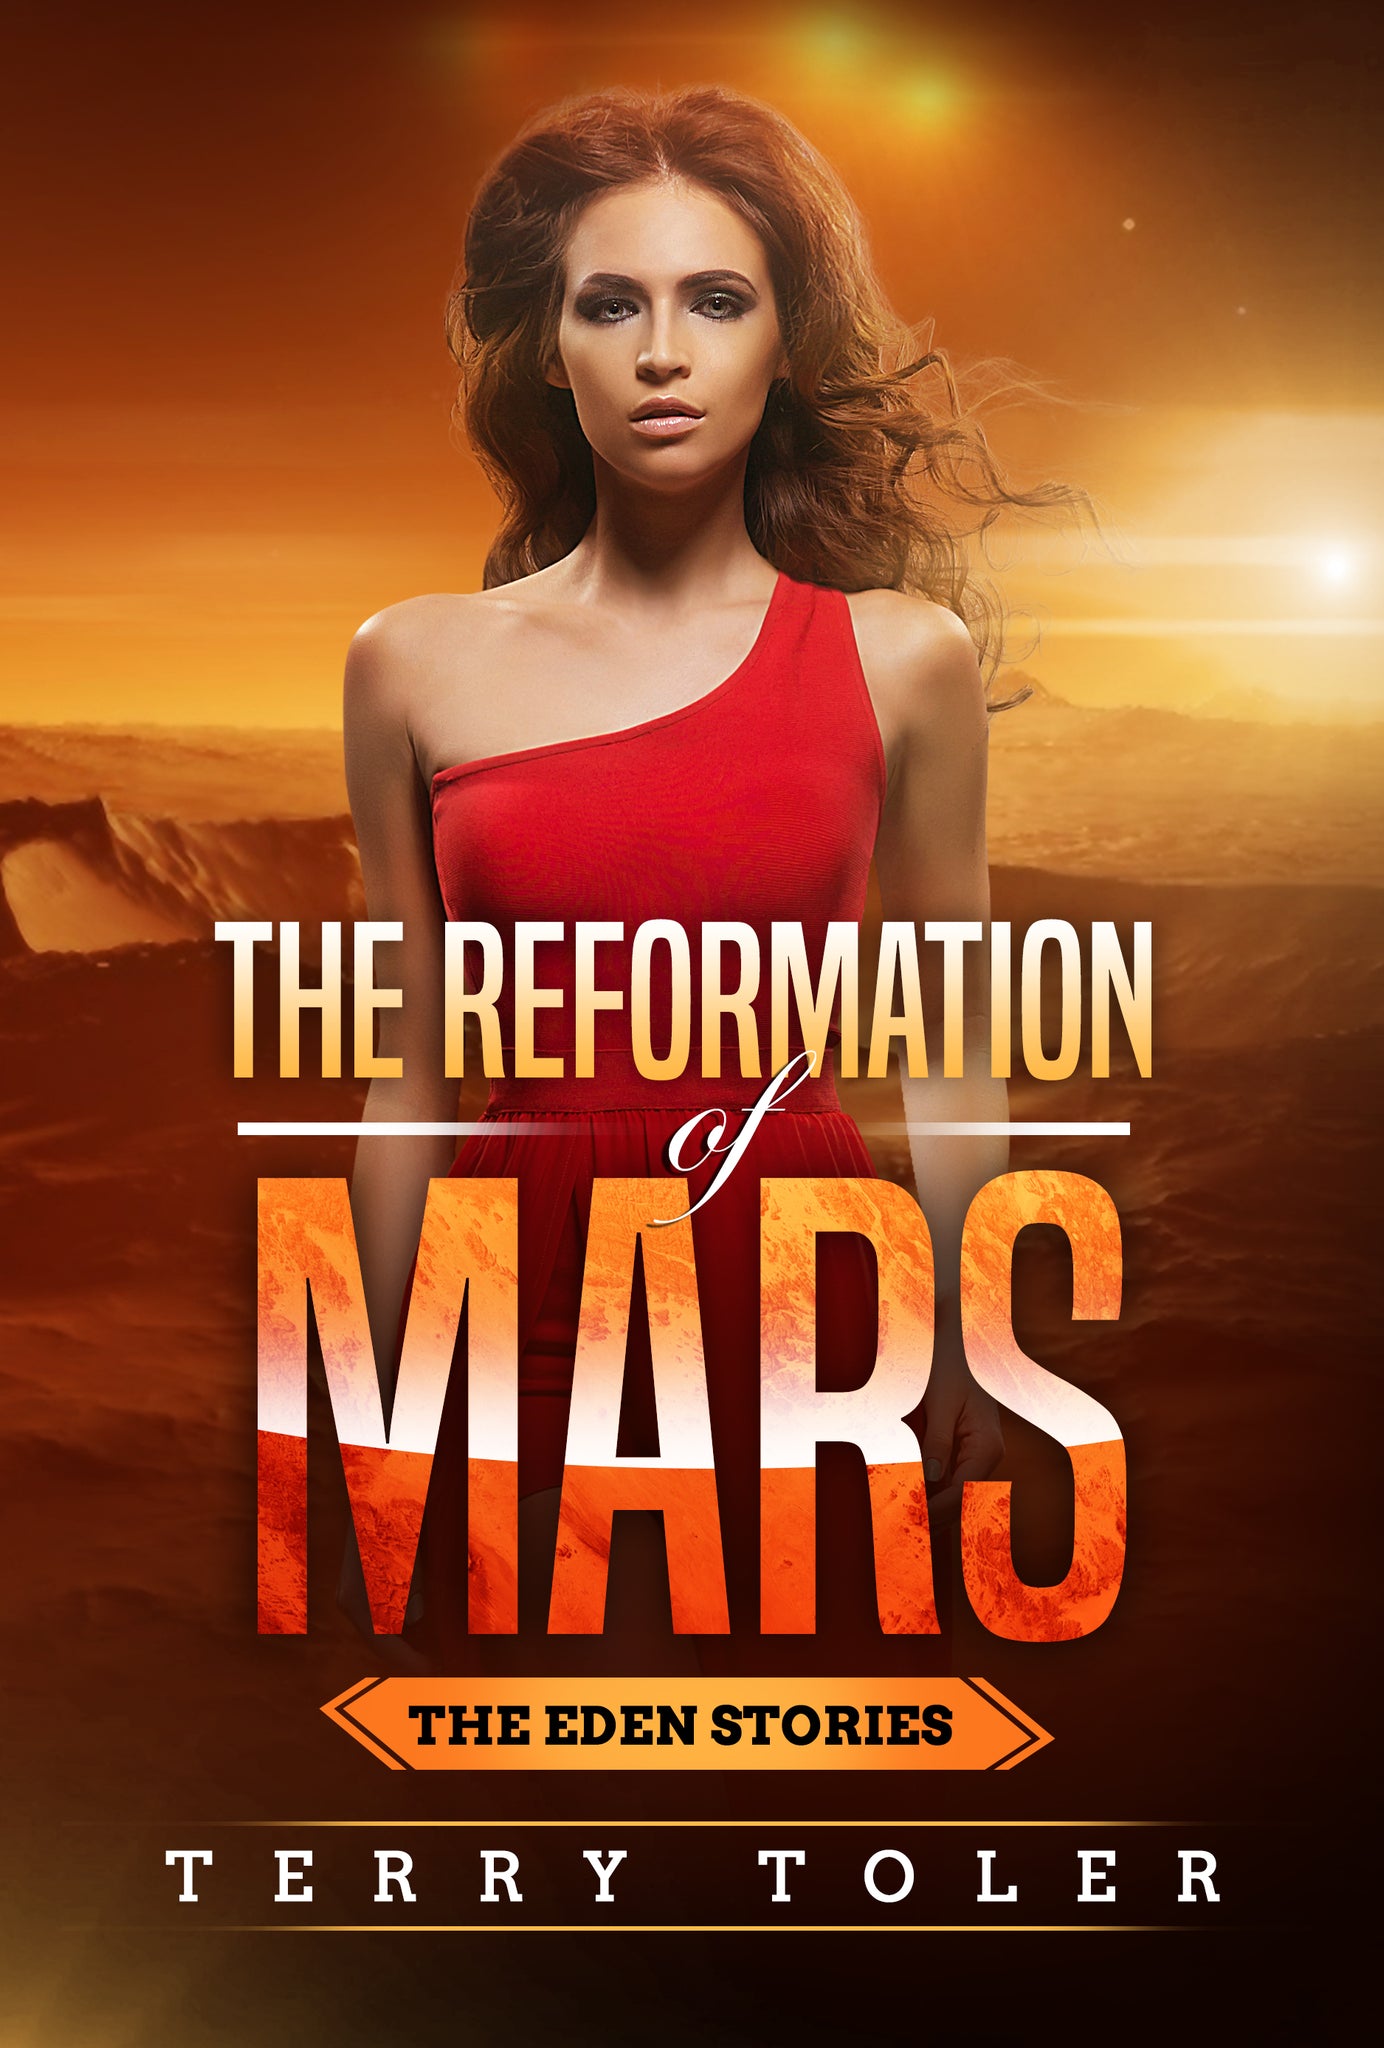 THE REFORMATION OF MARS